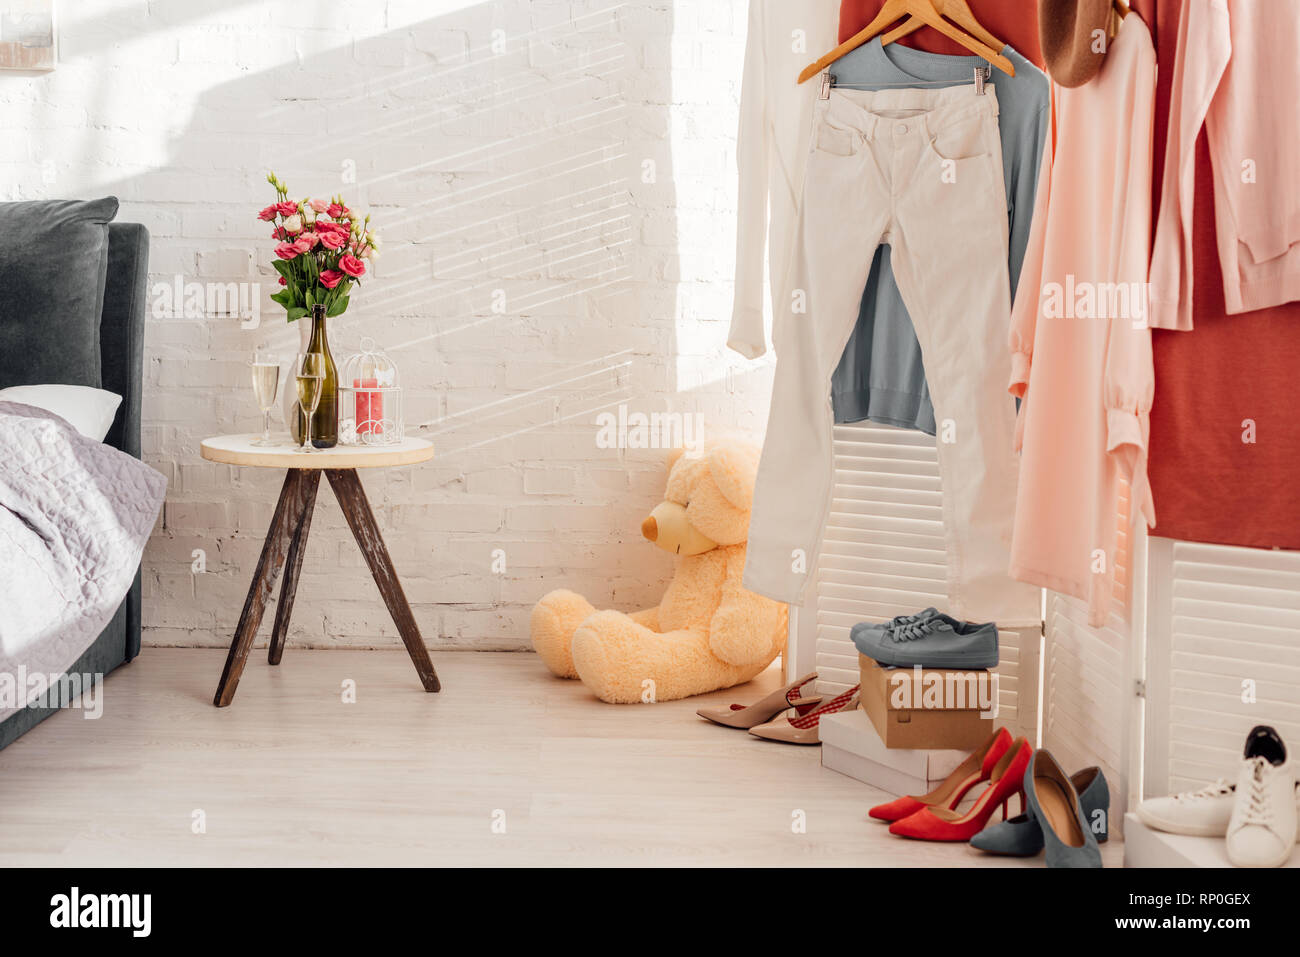 interior desgn of bedroom with table, flowers, teddy bear toy, clothes and footwear Stock Photo